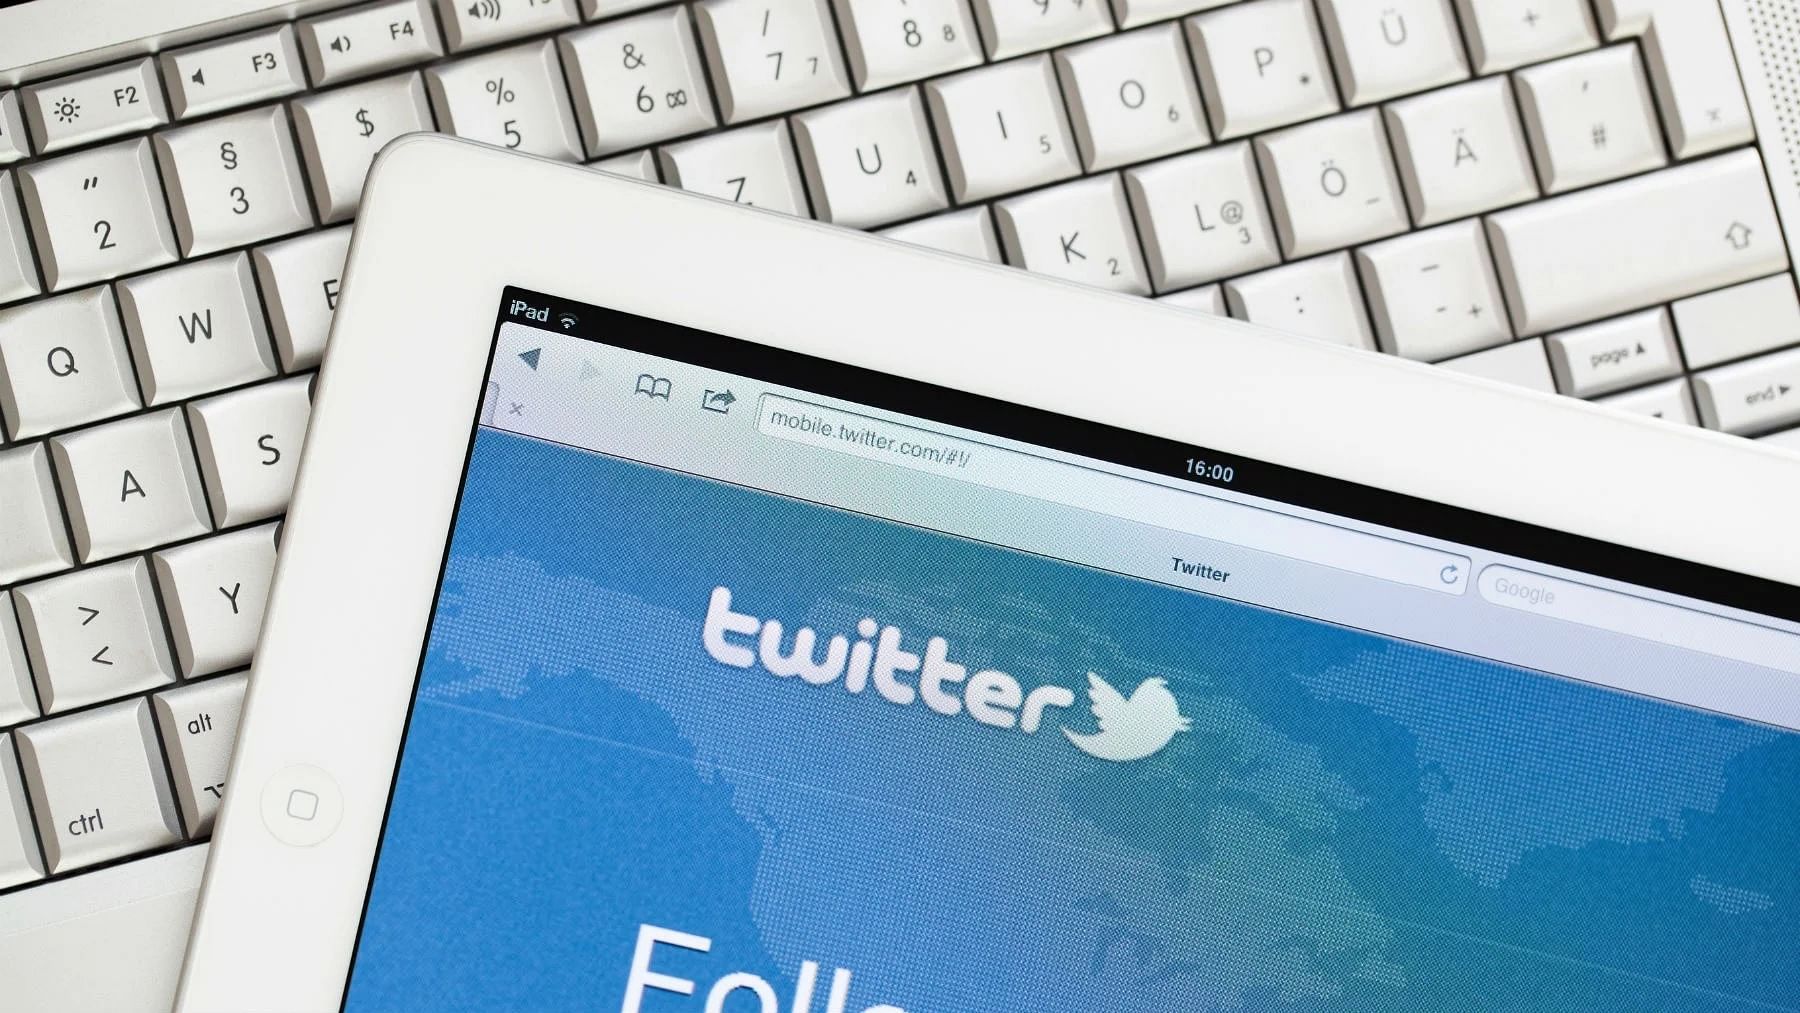 Twitter may place a notice next to Tweets that share synthetic or manipulated media.